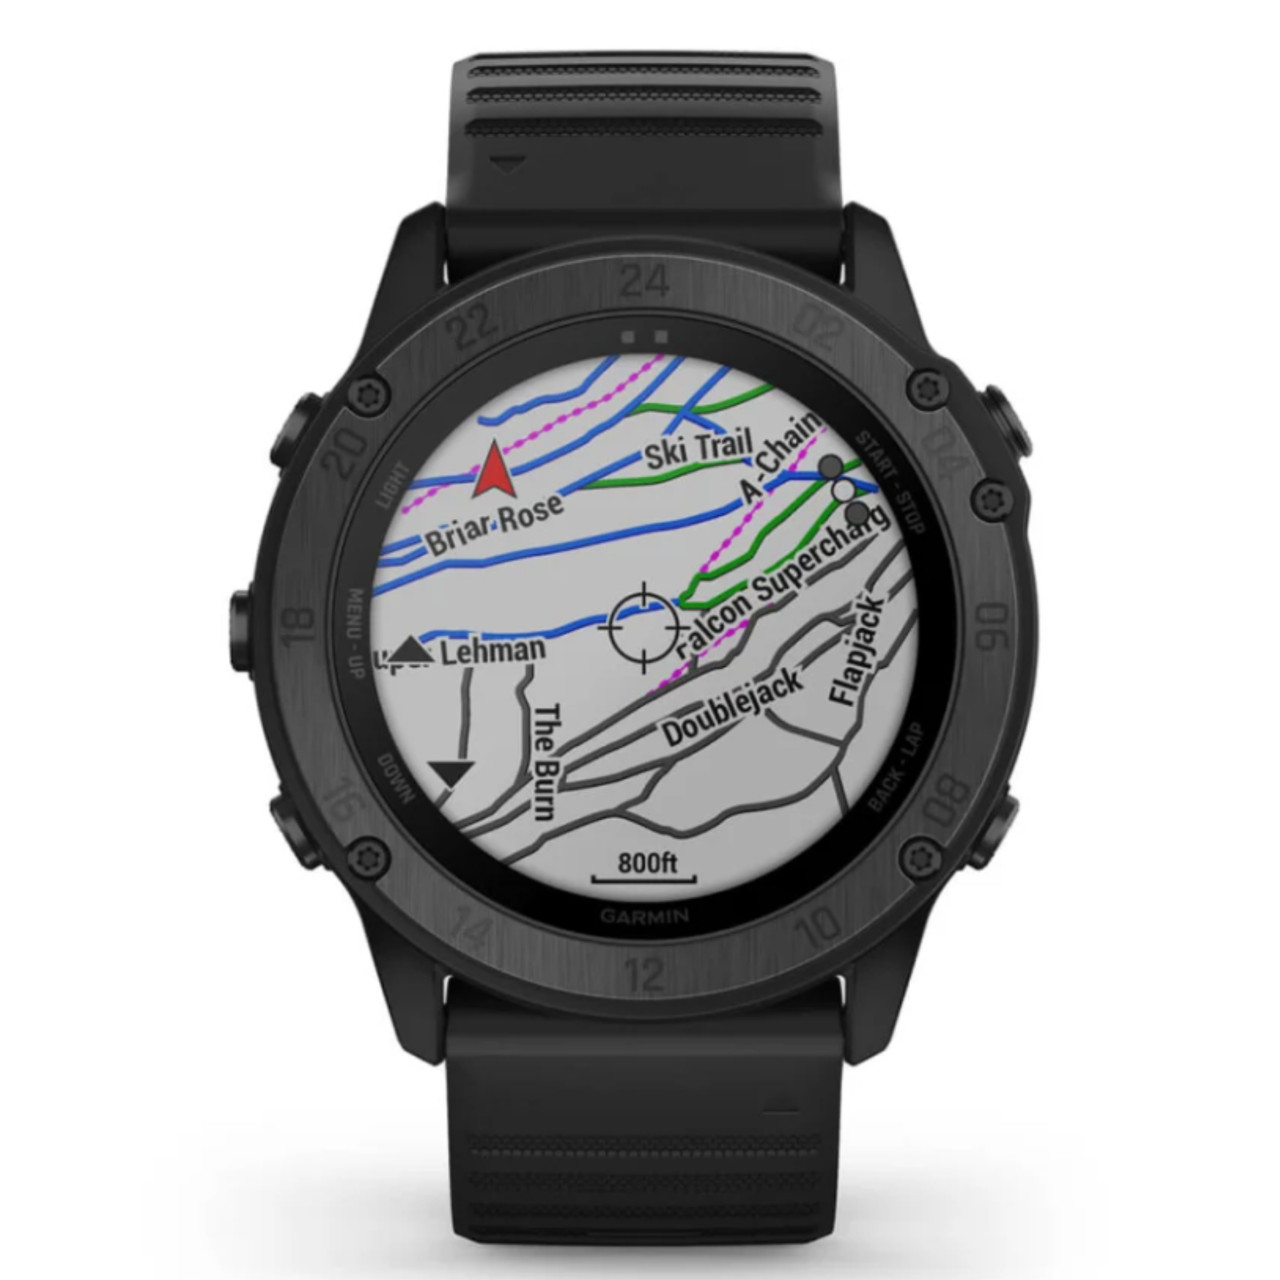 Garmin New OEM tactix® Delta - Sapphire Edition Premium Tactical GPS Watch with Silicone Band, 010-02357-00